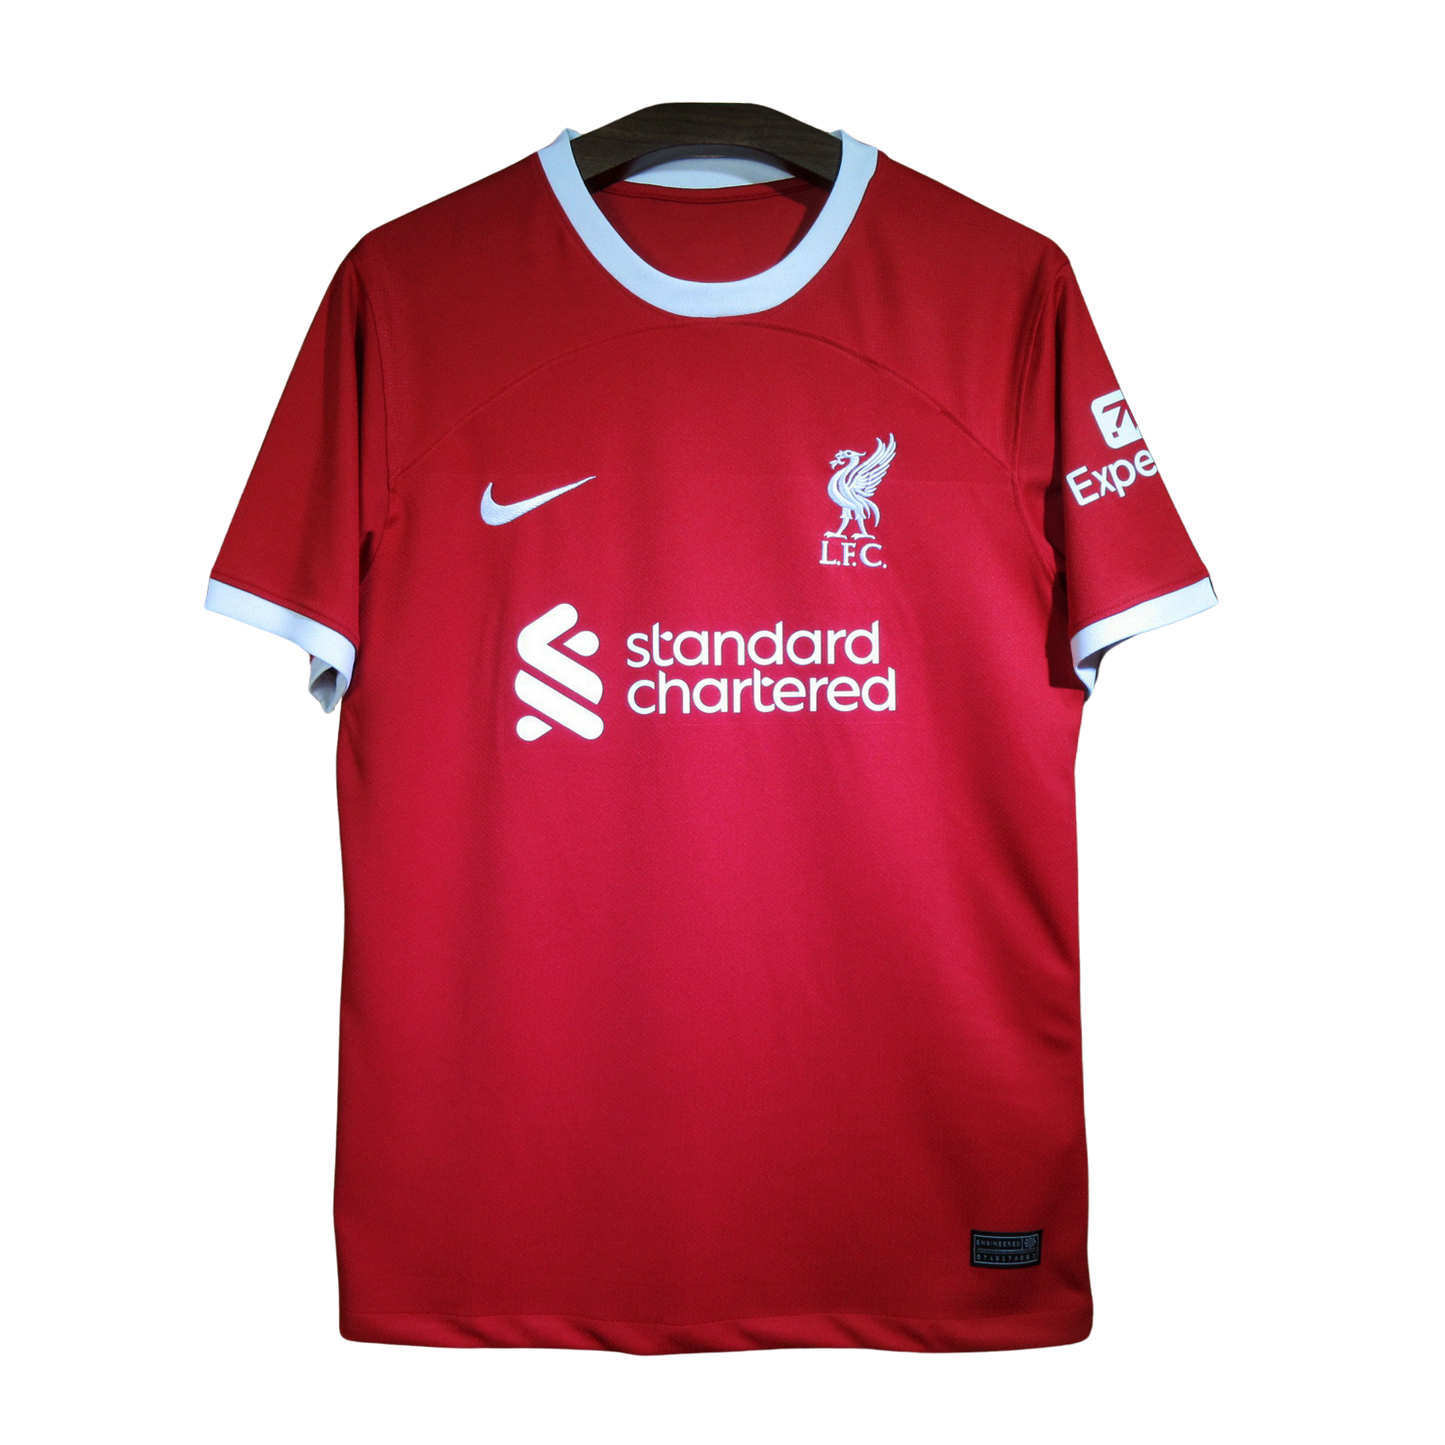 Liverpool home kit 23/24 - Fan version - Front